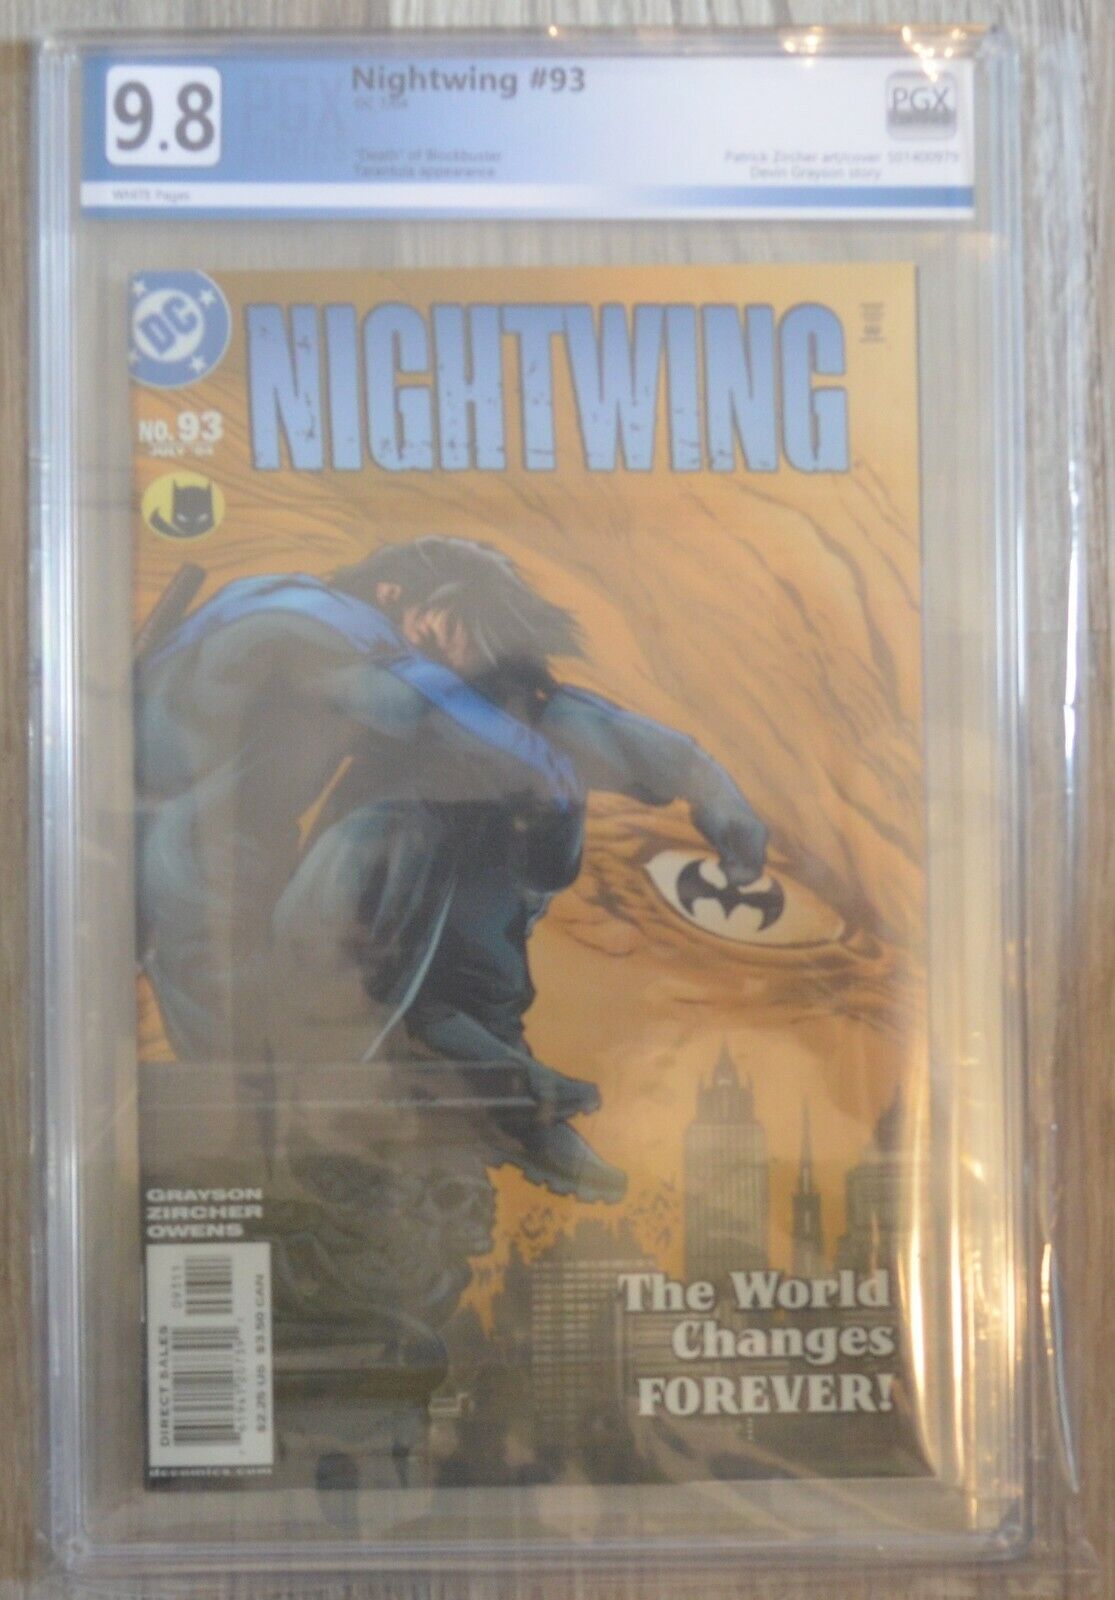 NIGHTWING #93 (2004 | DC) PGX 9.8 (NM/MT) Like CGC - Controversial Assault Issue